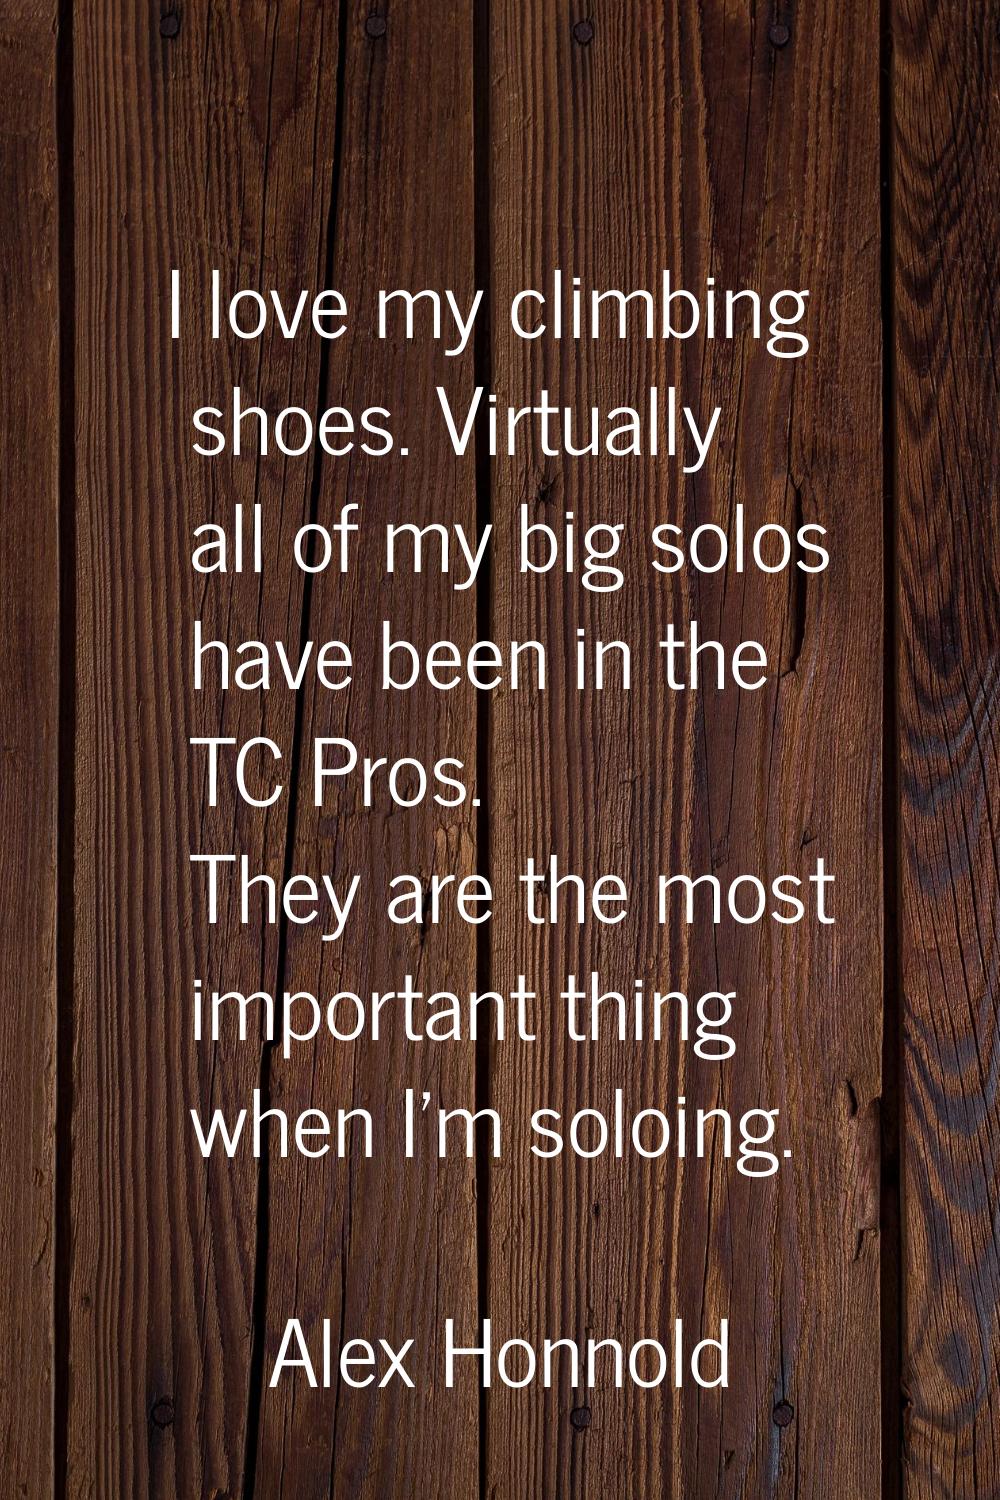 I love my climbing shoes. Virtually all of my big solos have been in the TC Pros. They are the most